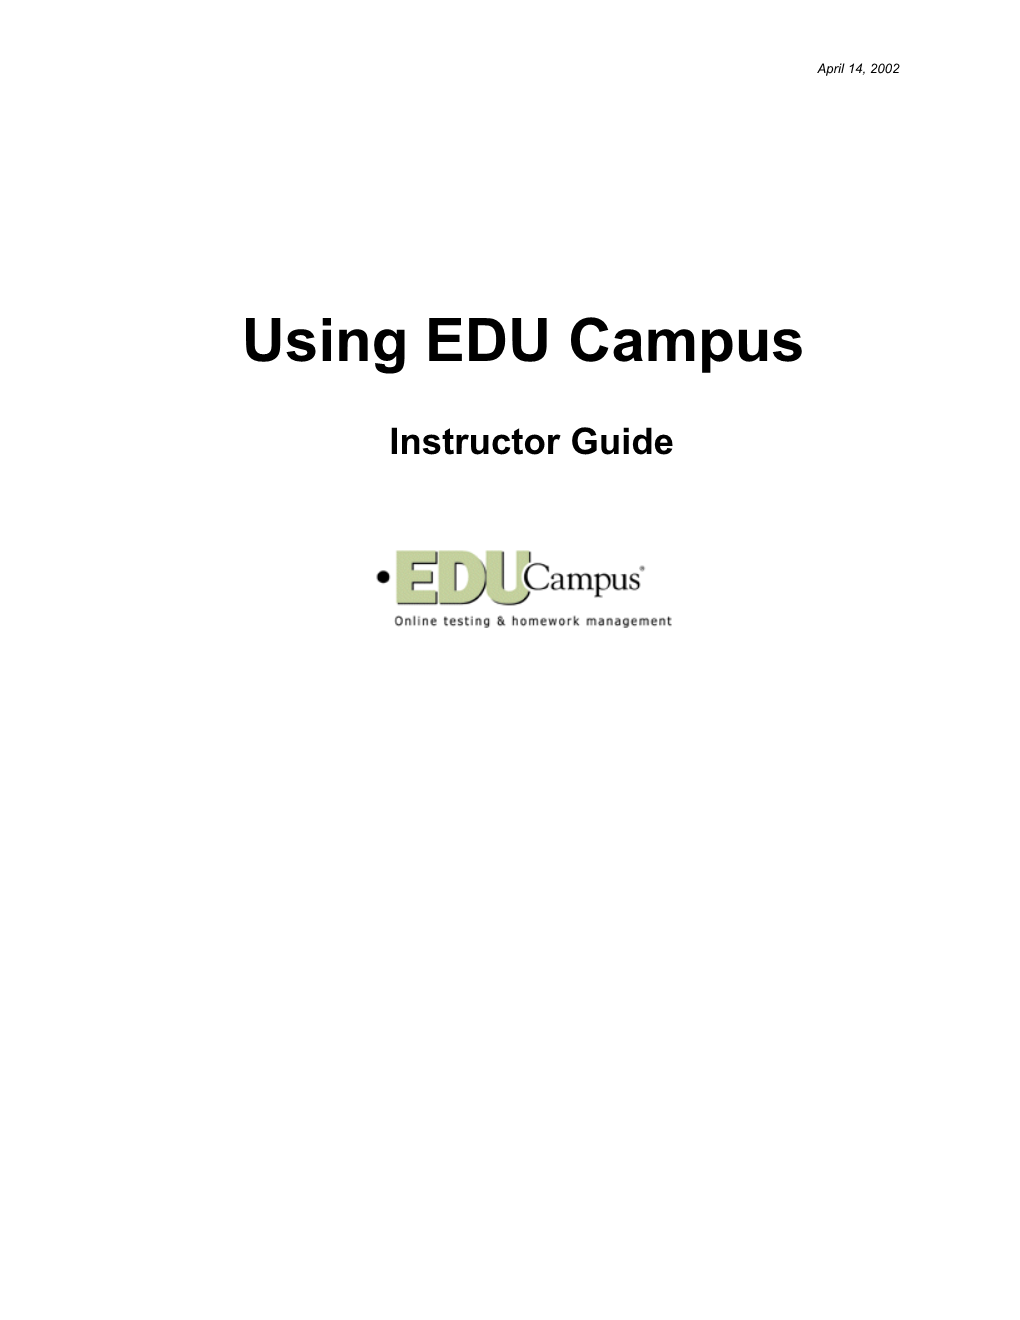 Instructor Guide to EDU Campus